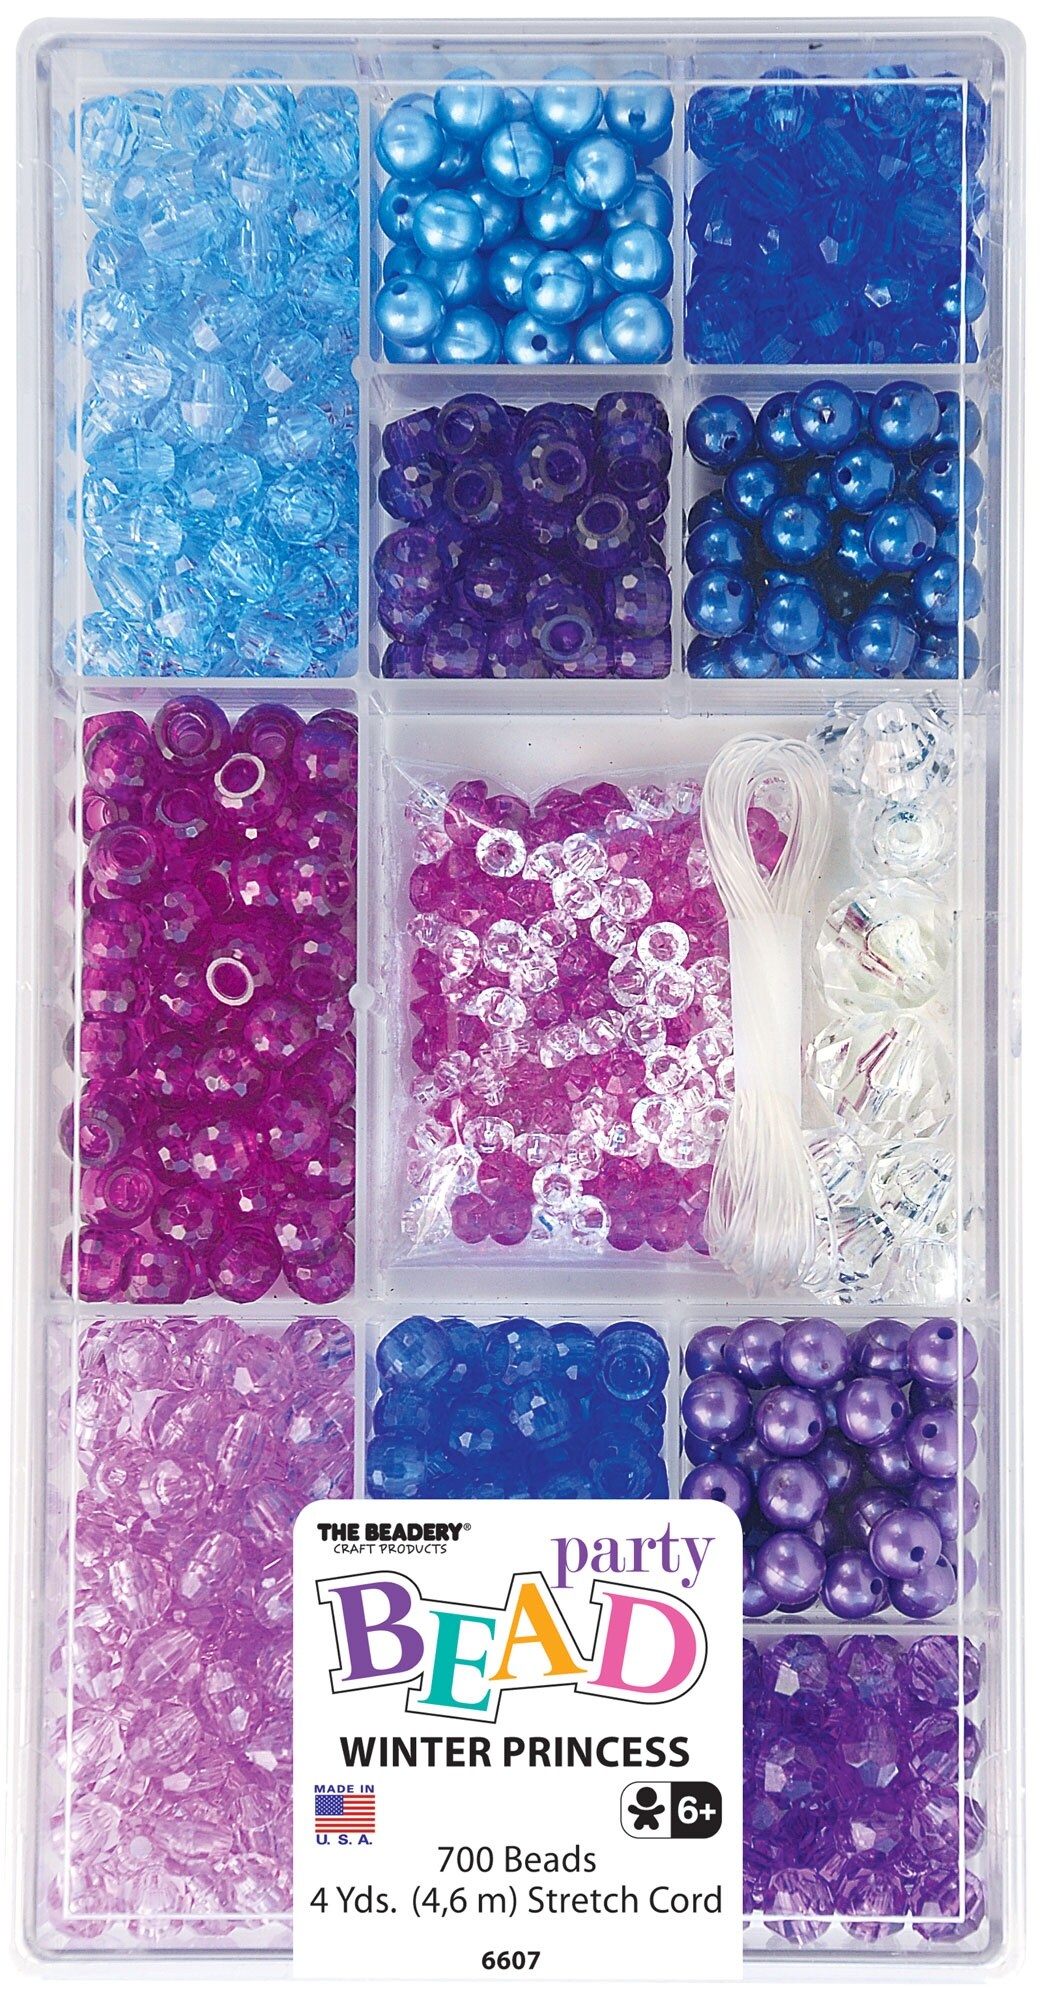 2186 – Large Utility Box  The Beadery Craft Products